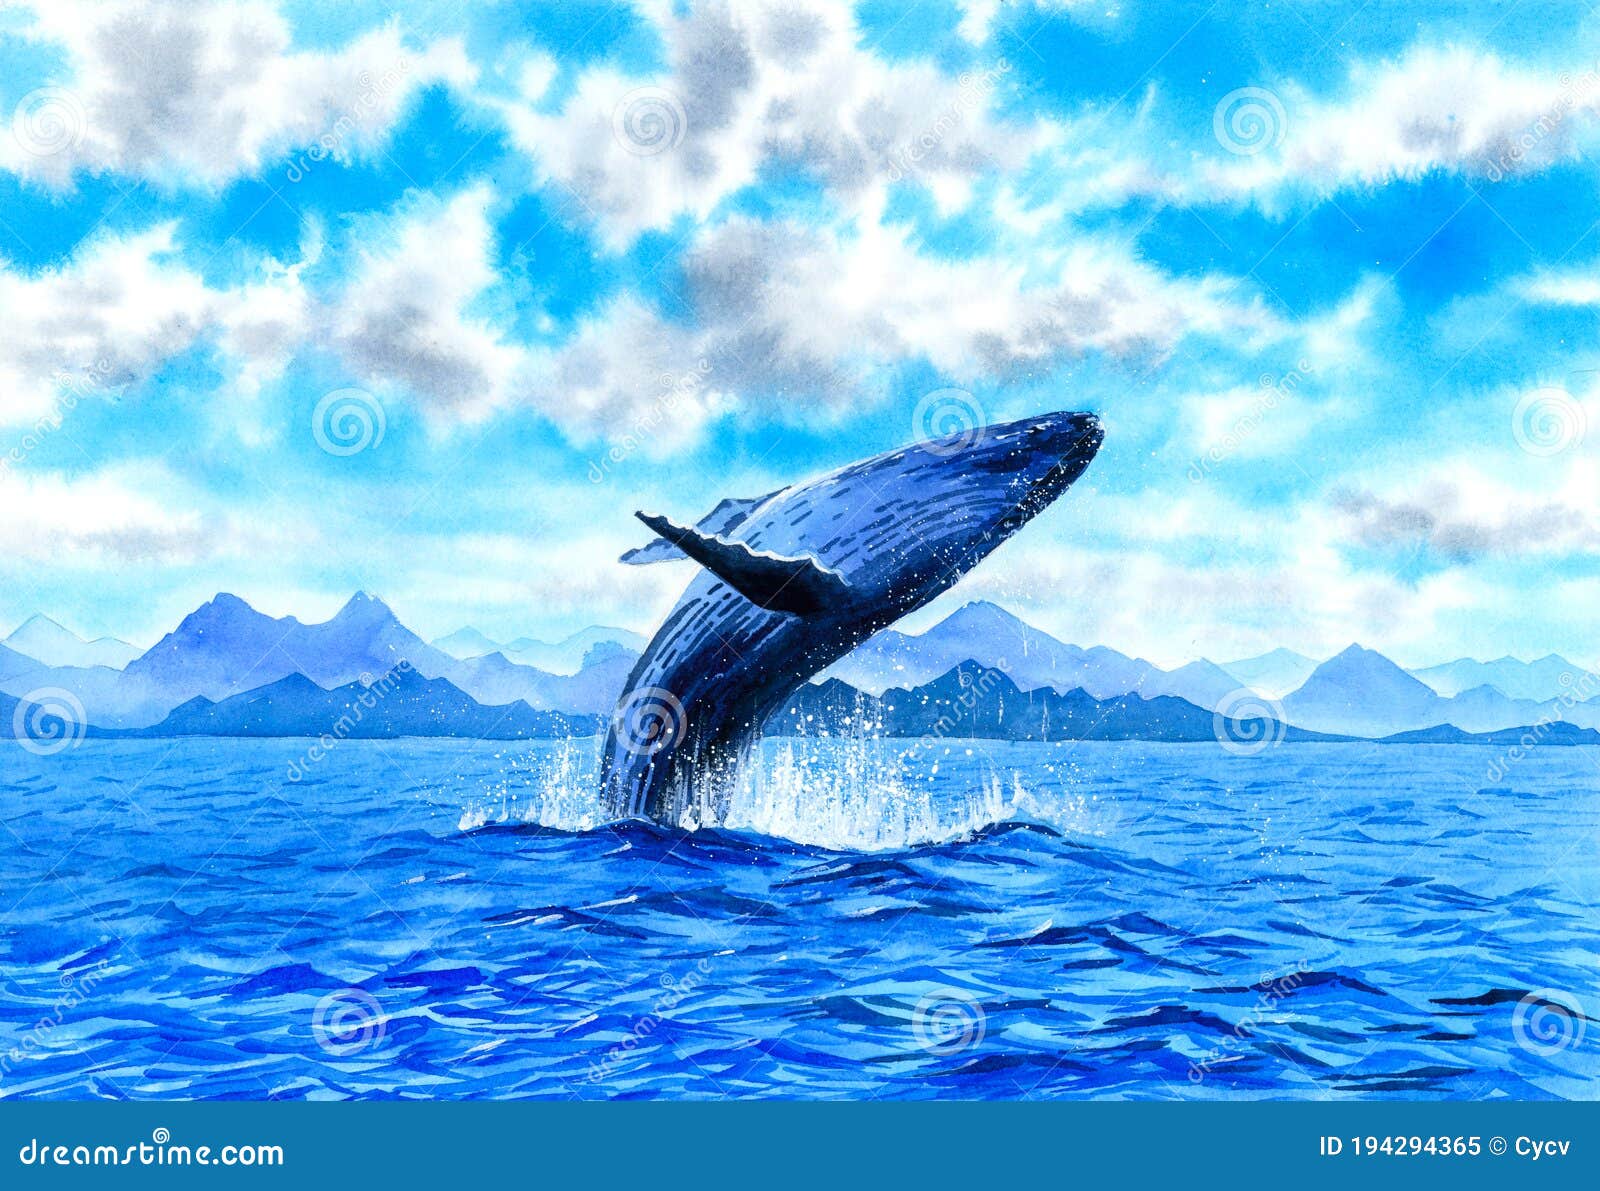 watercolor painting - whale breaching